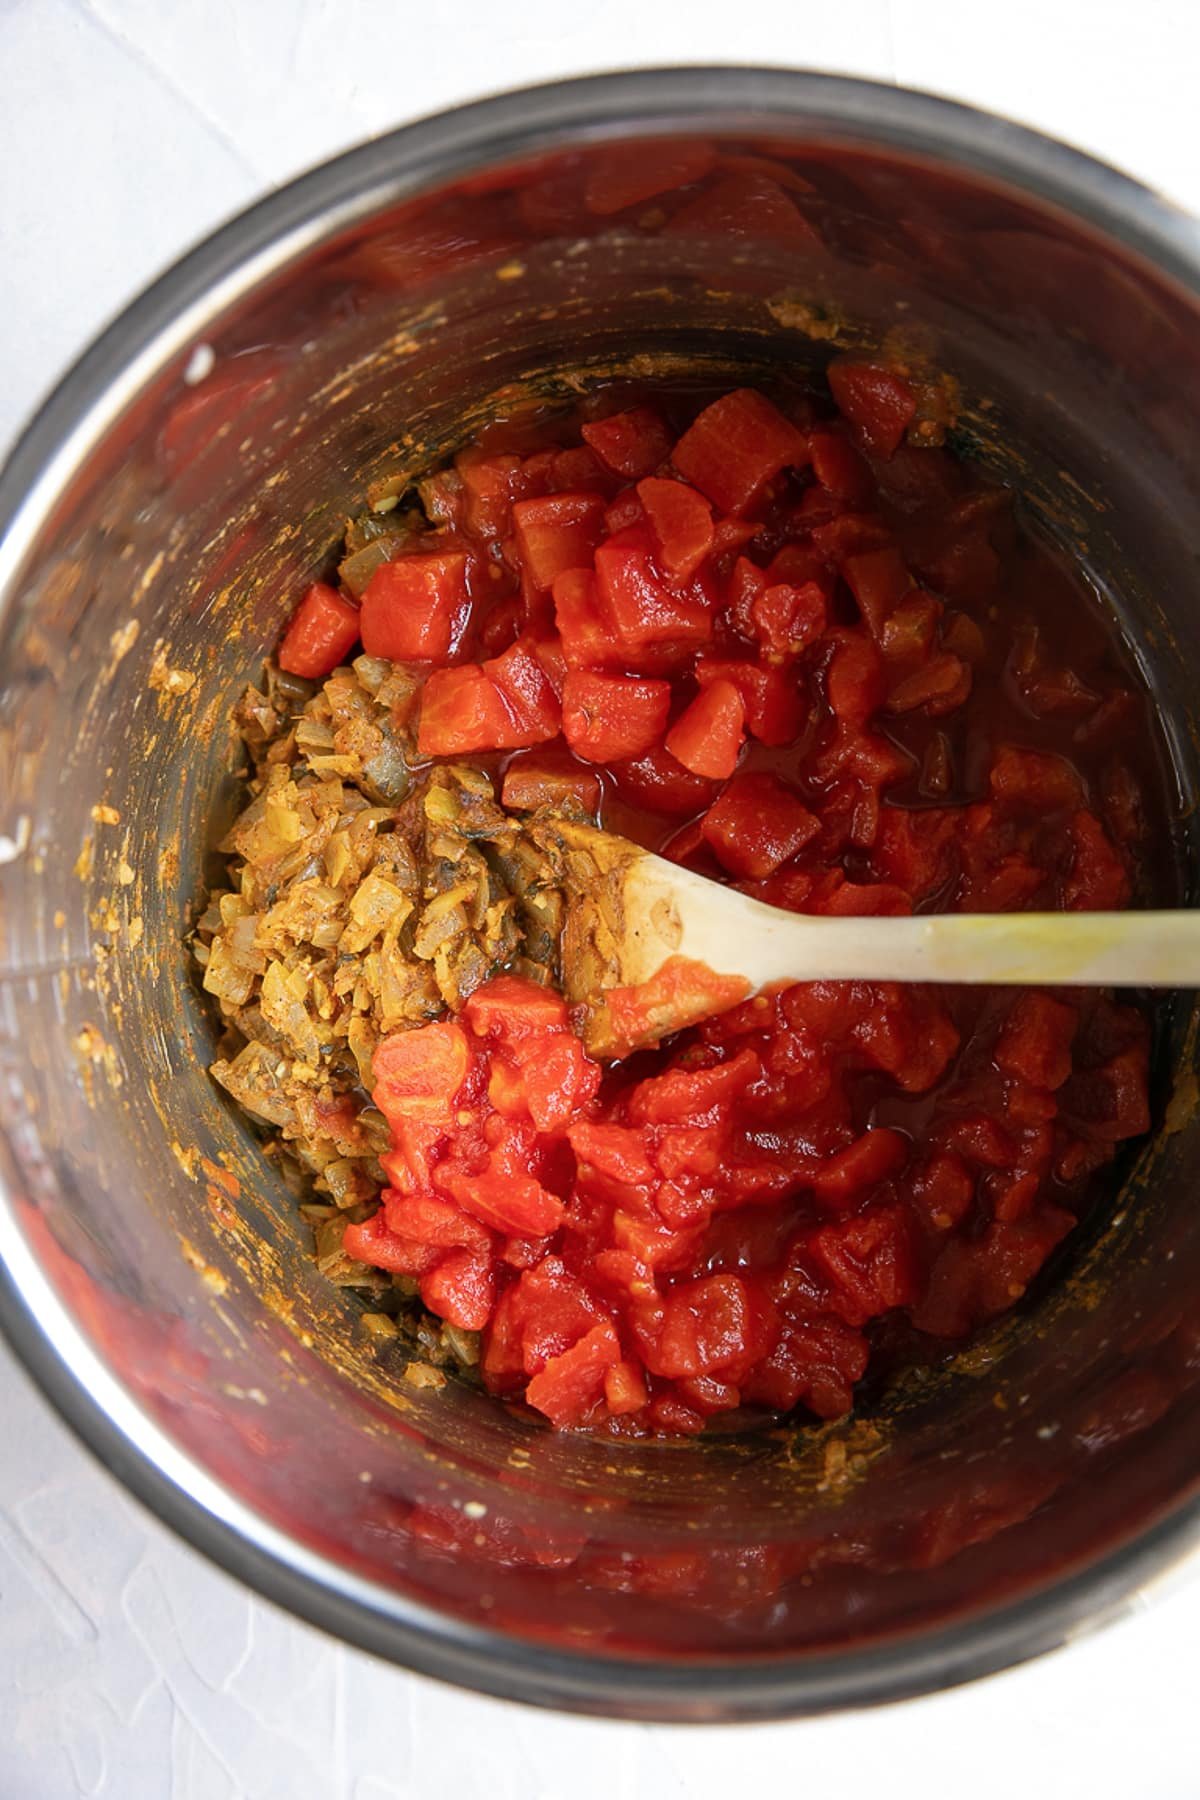 Onions and spices sauteeing in the bowl of an Instant pot with canned tomatoes.